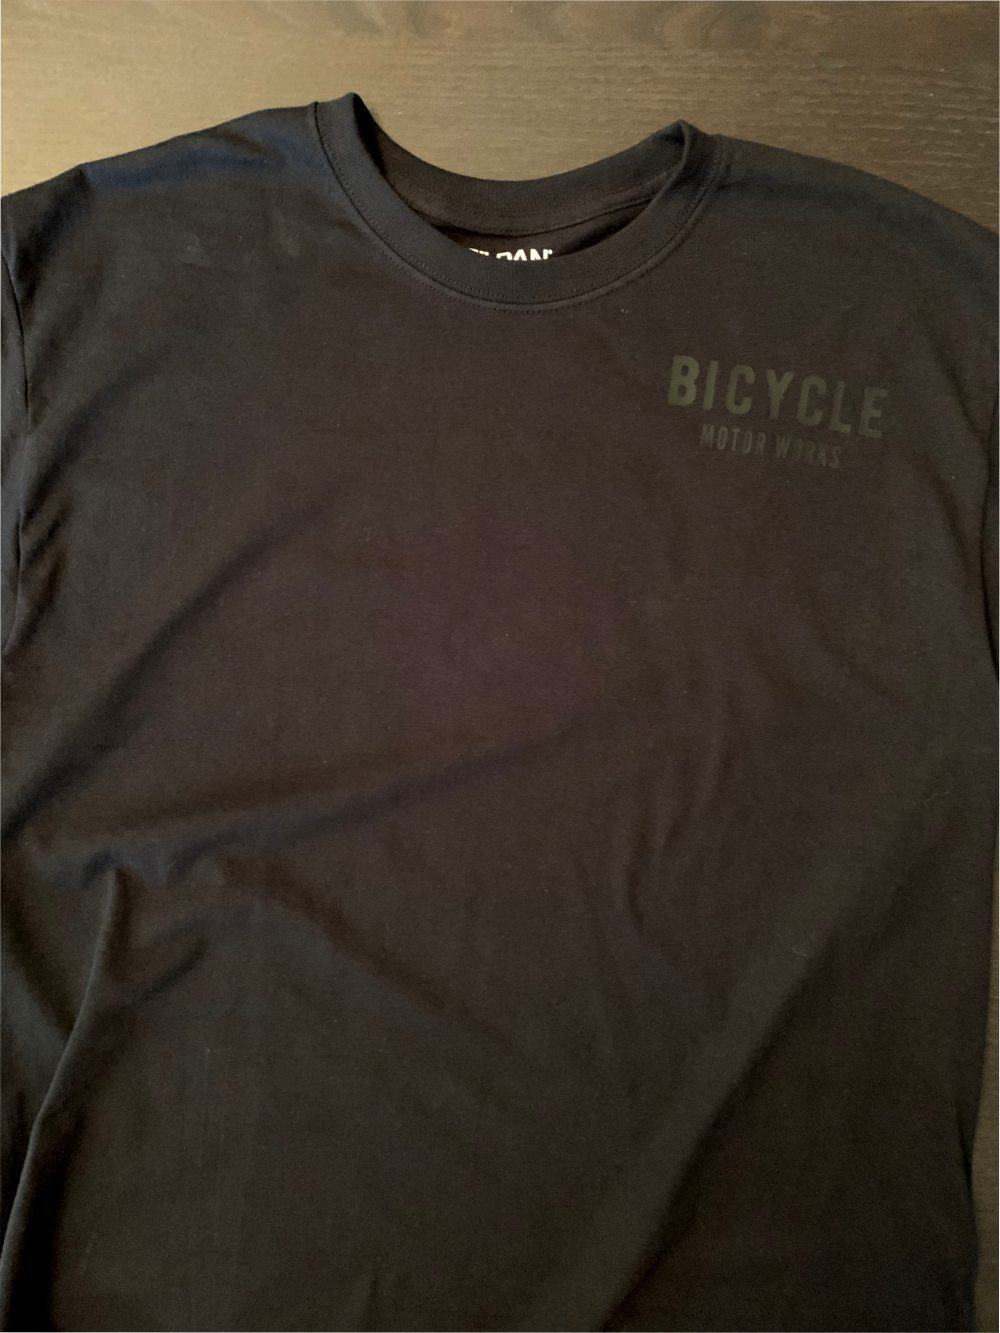 A black shirt with the words bicycle made easy on it.